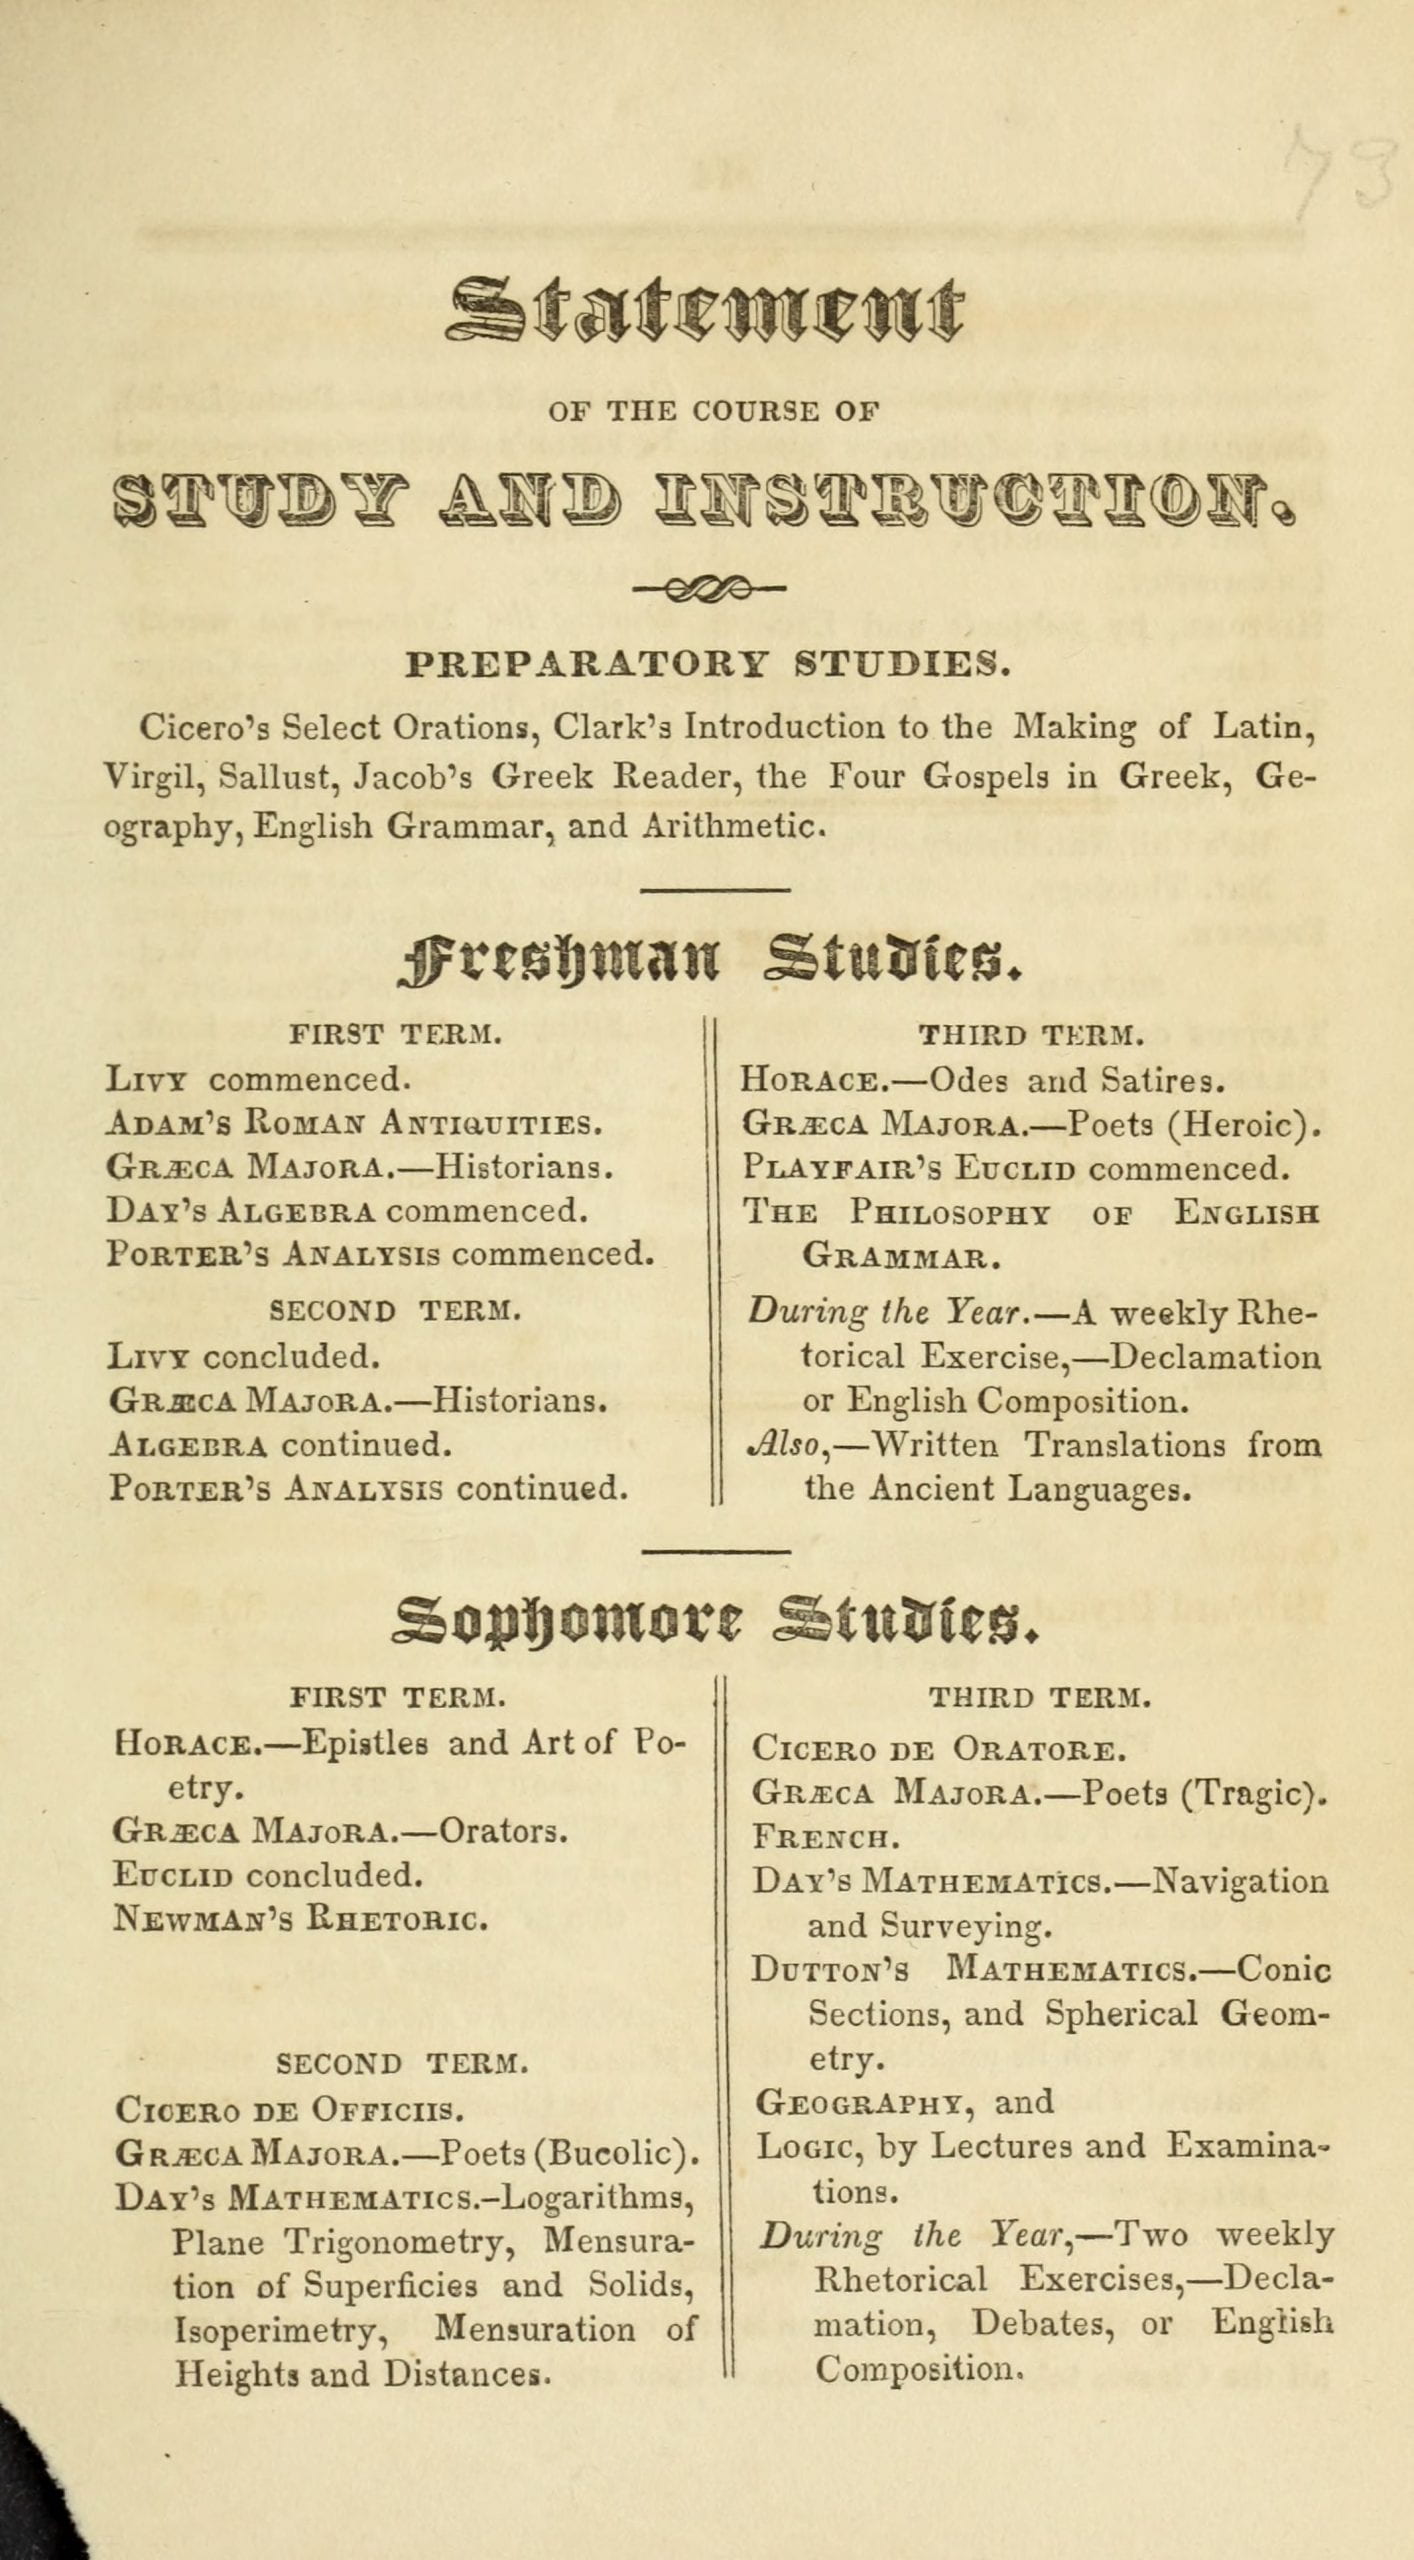 Sample course of study from 1829-30